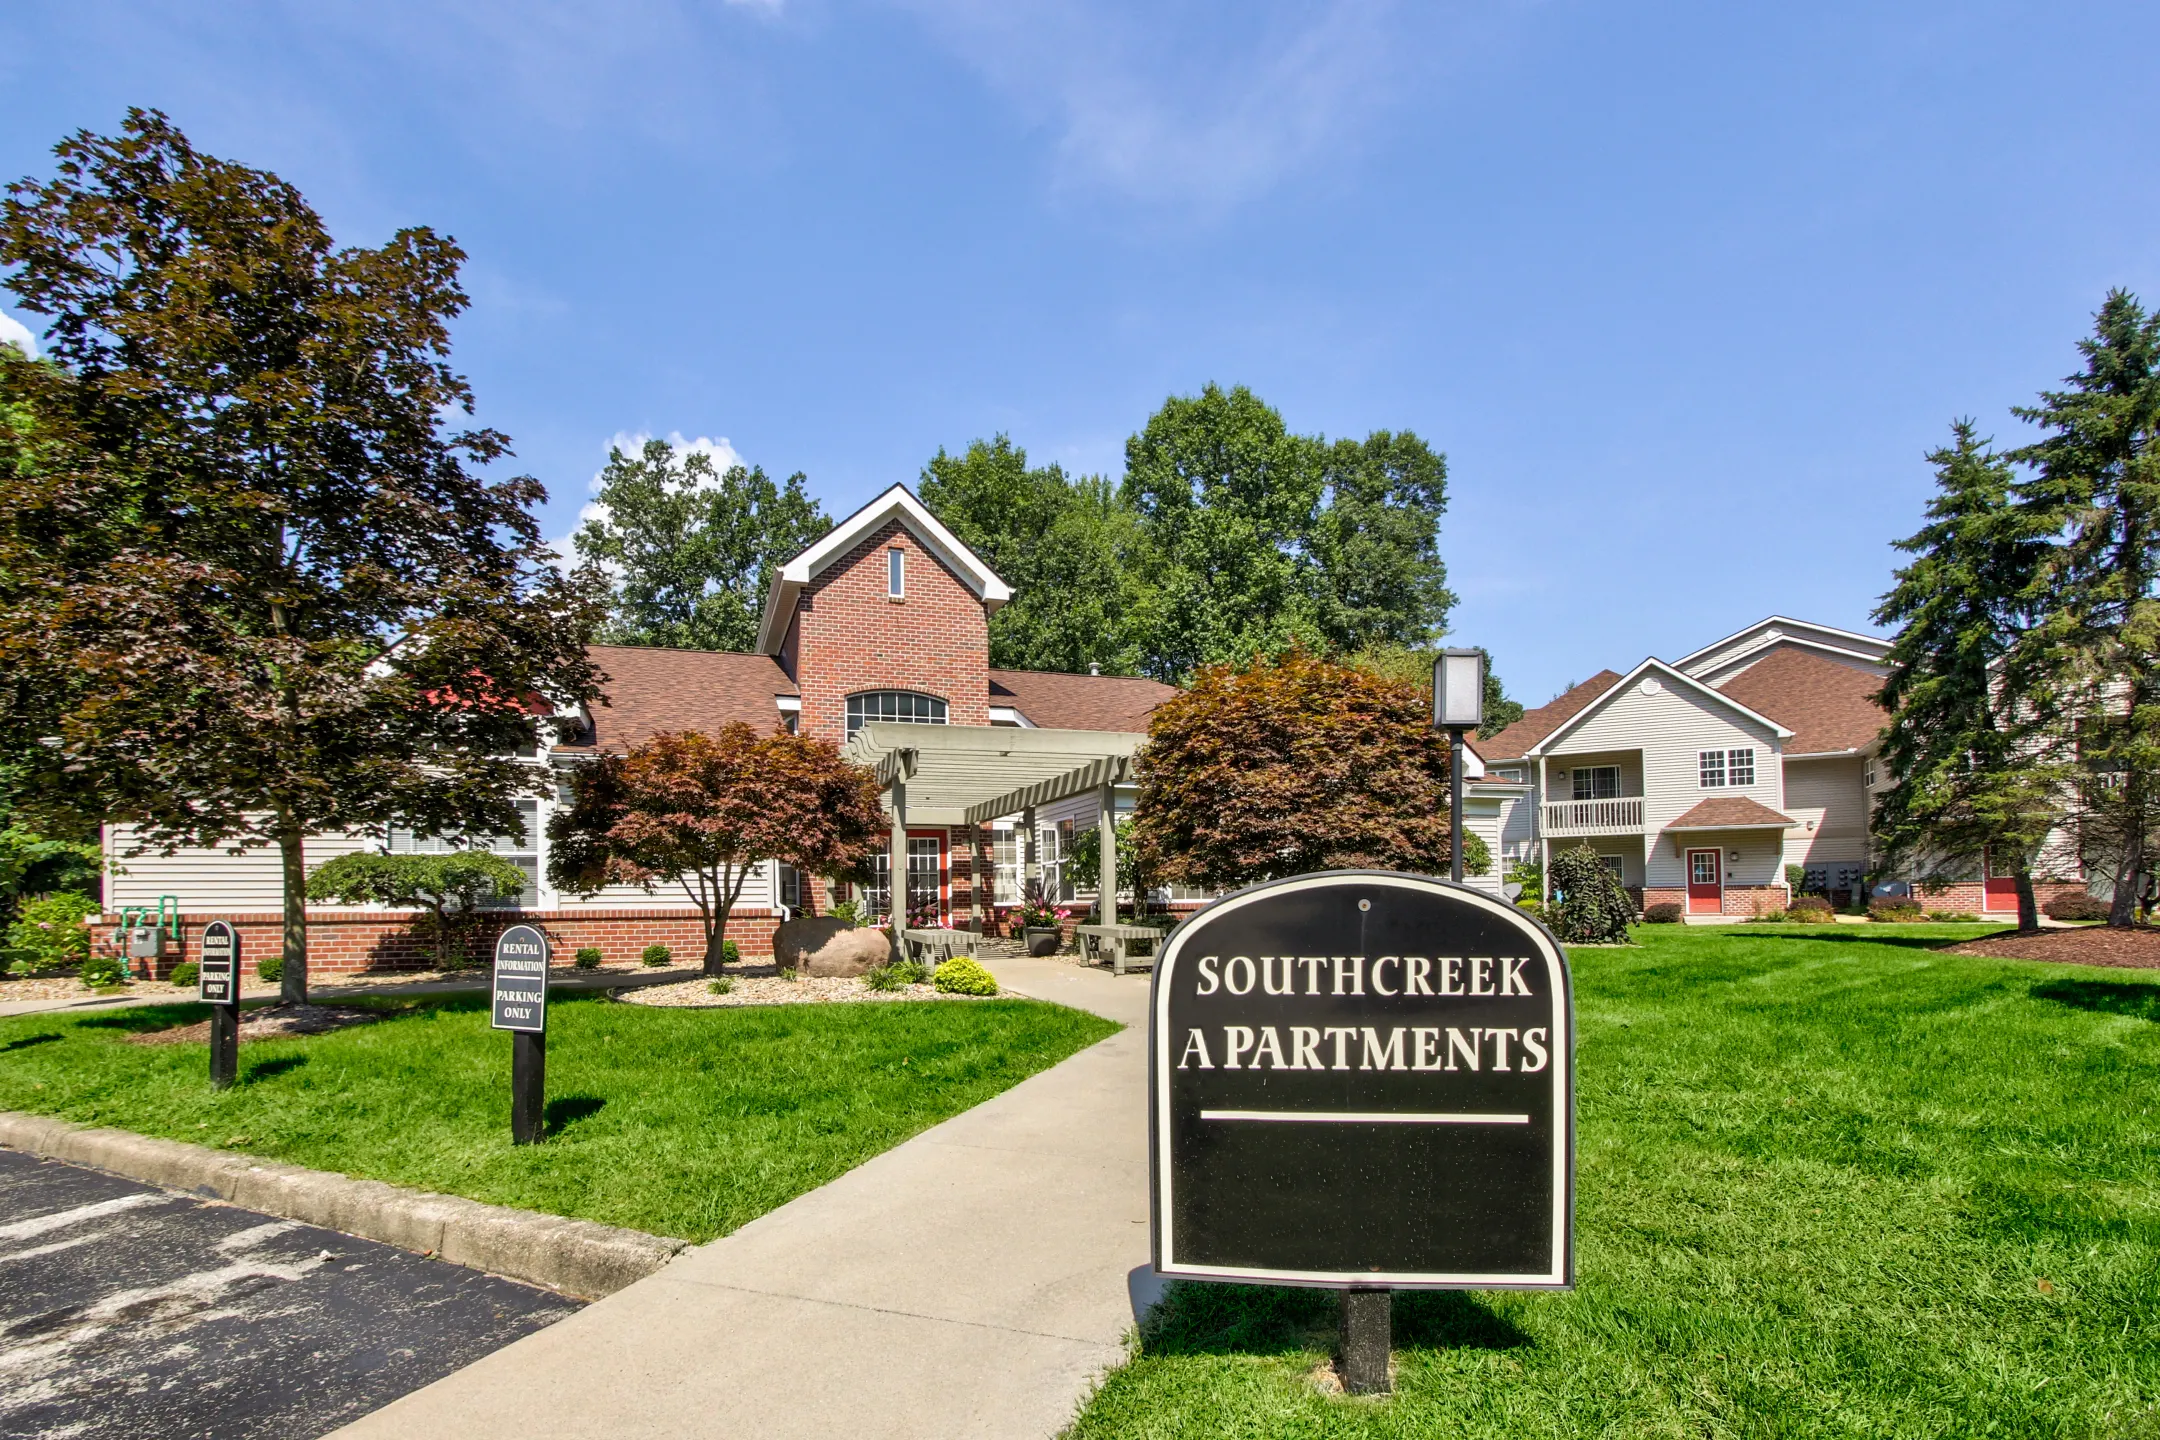 Building - Southcreek Apartments - Youngstown, OH